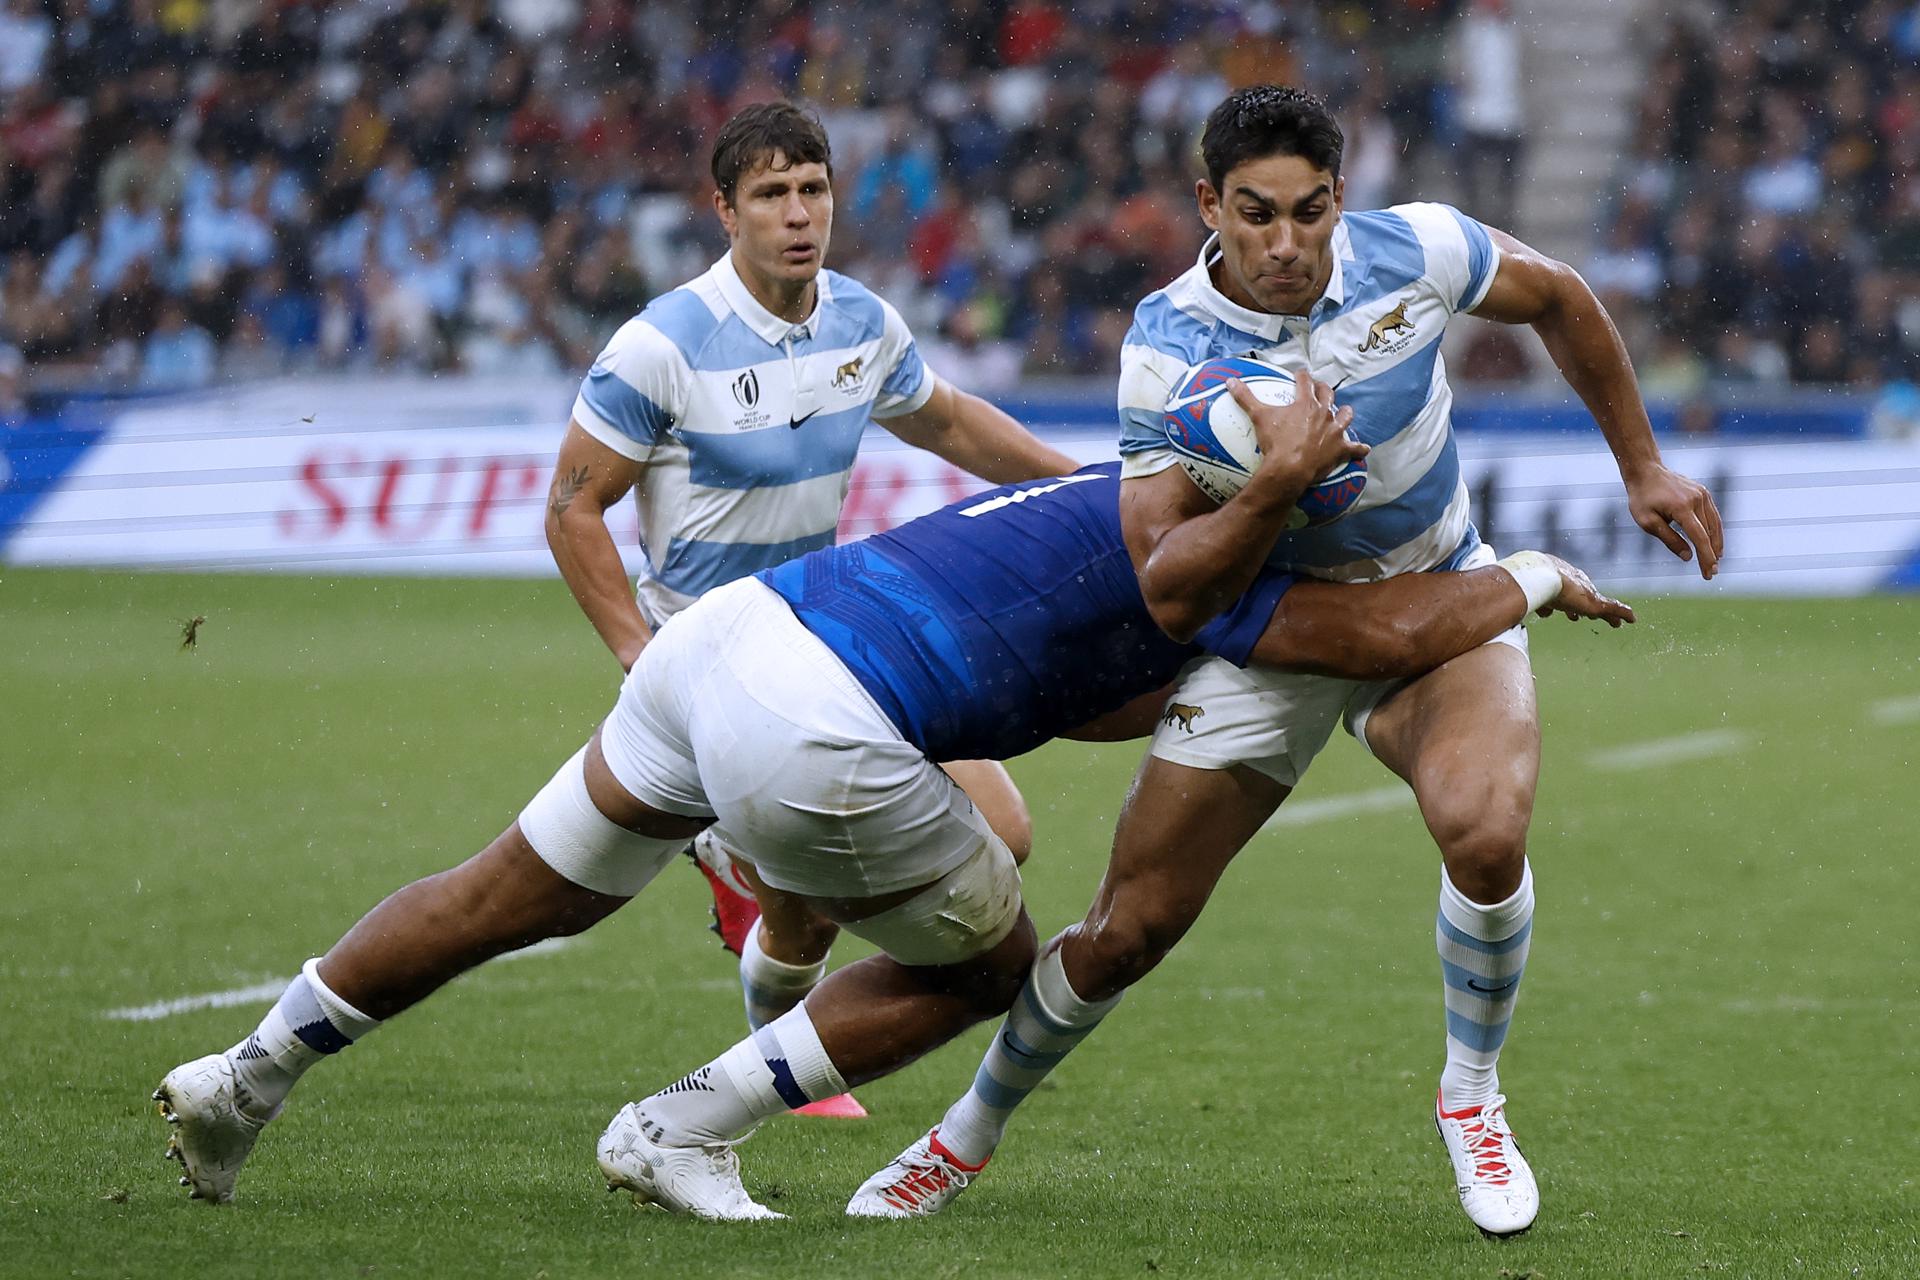 Argentina's Santiago Carreras (R) is tackled by Samoa's James Lay (L) during the Rugby World Cup Pool D match between Argentina and Samoa in Saint-Etienne, France, 22 September 2023. EFE-EPA/GUILLAUME HORCAJUELO
